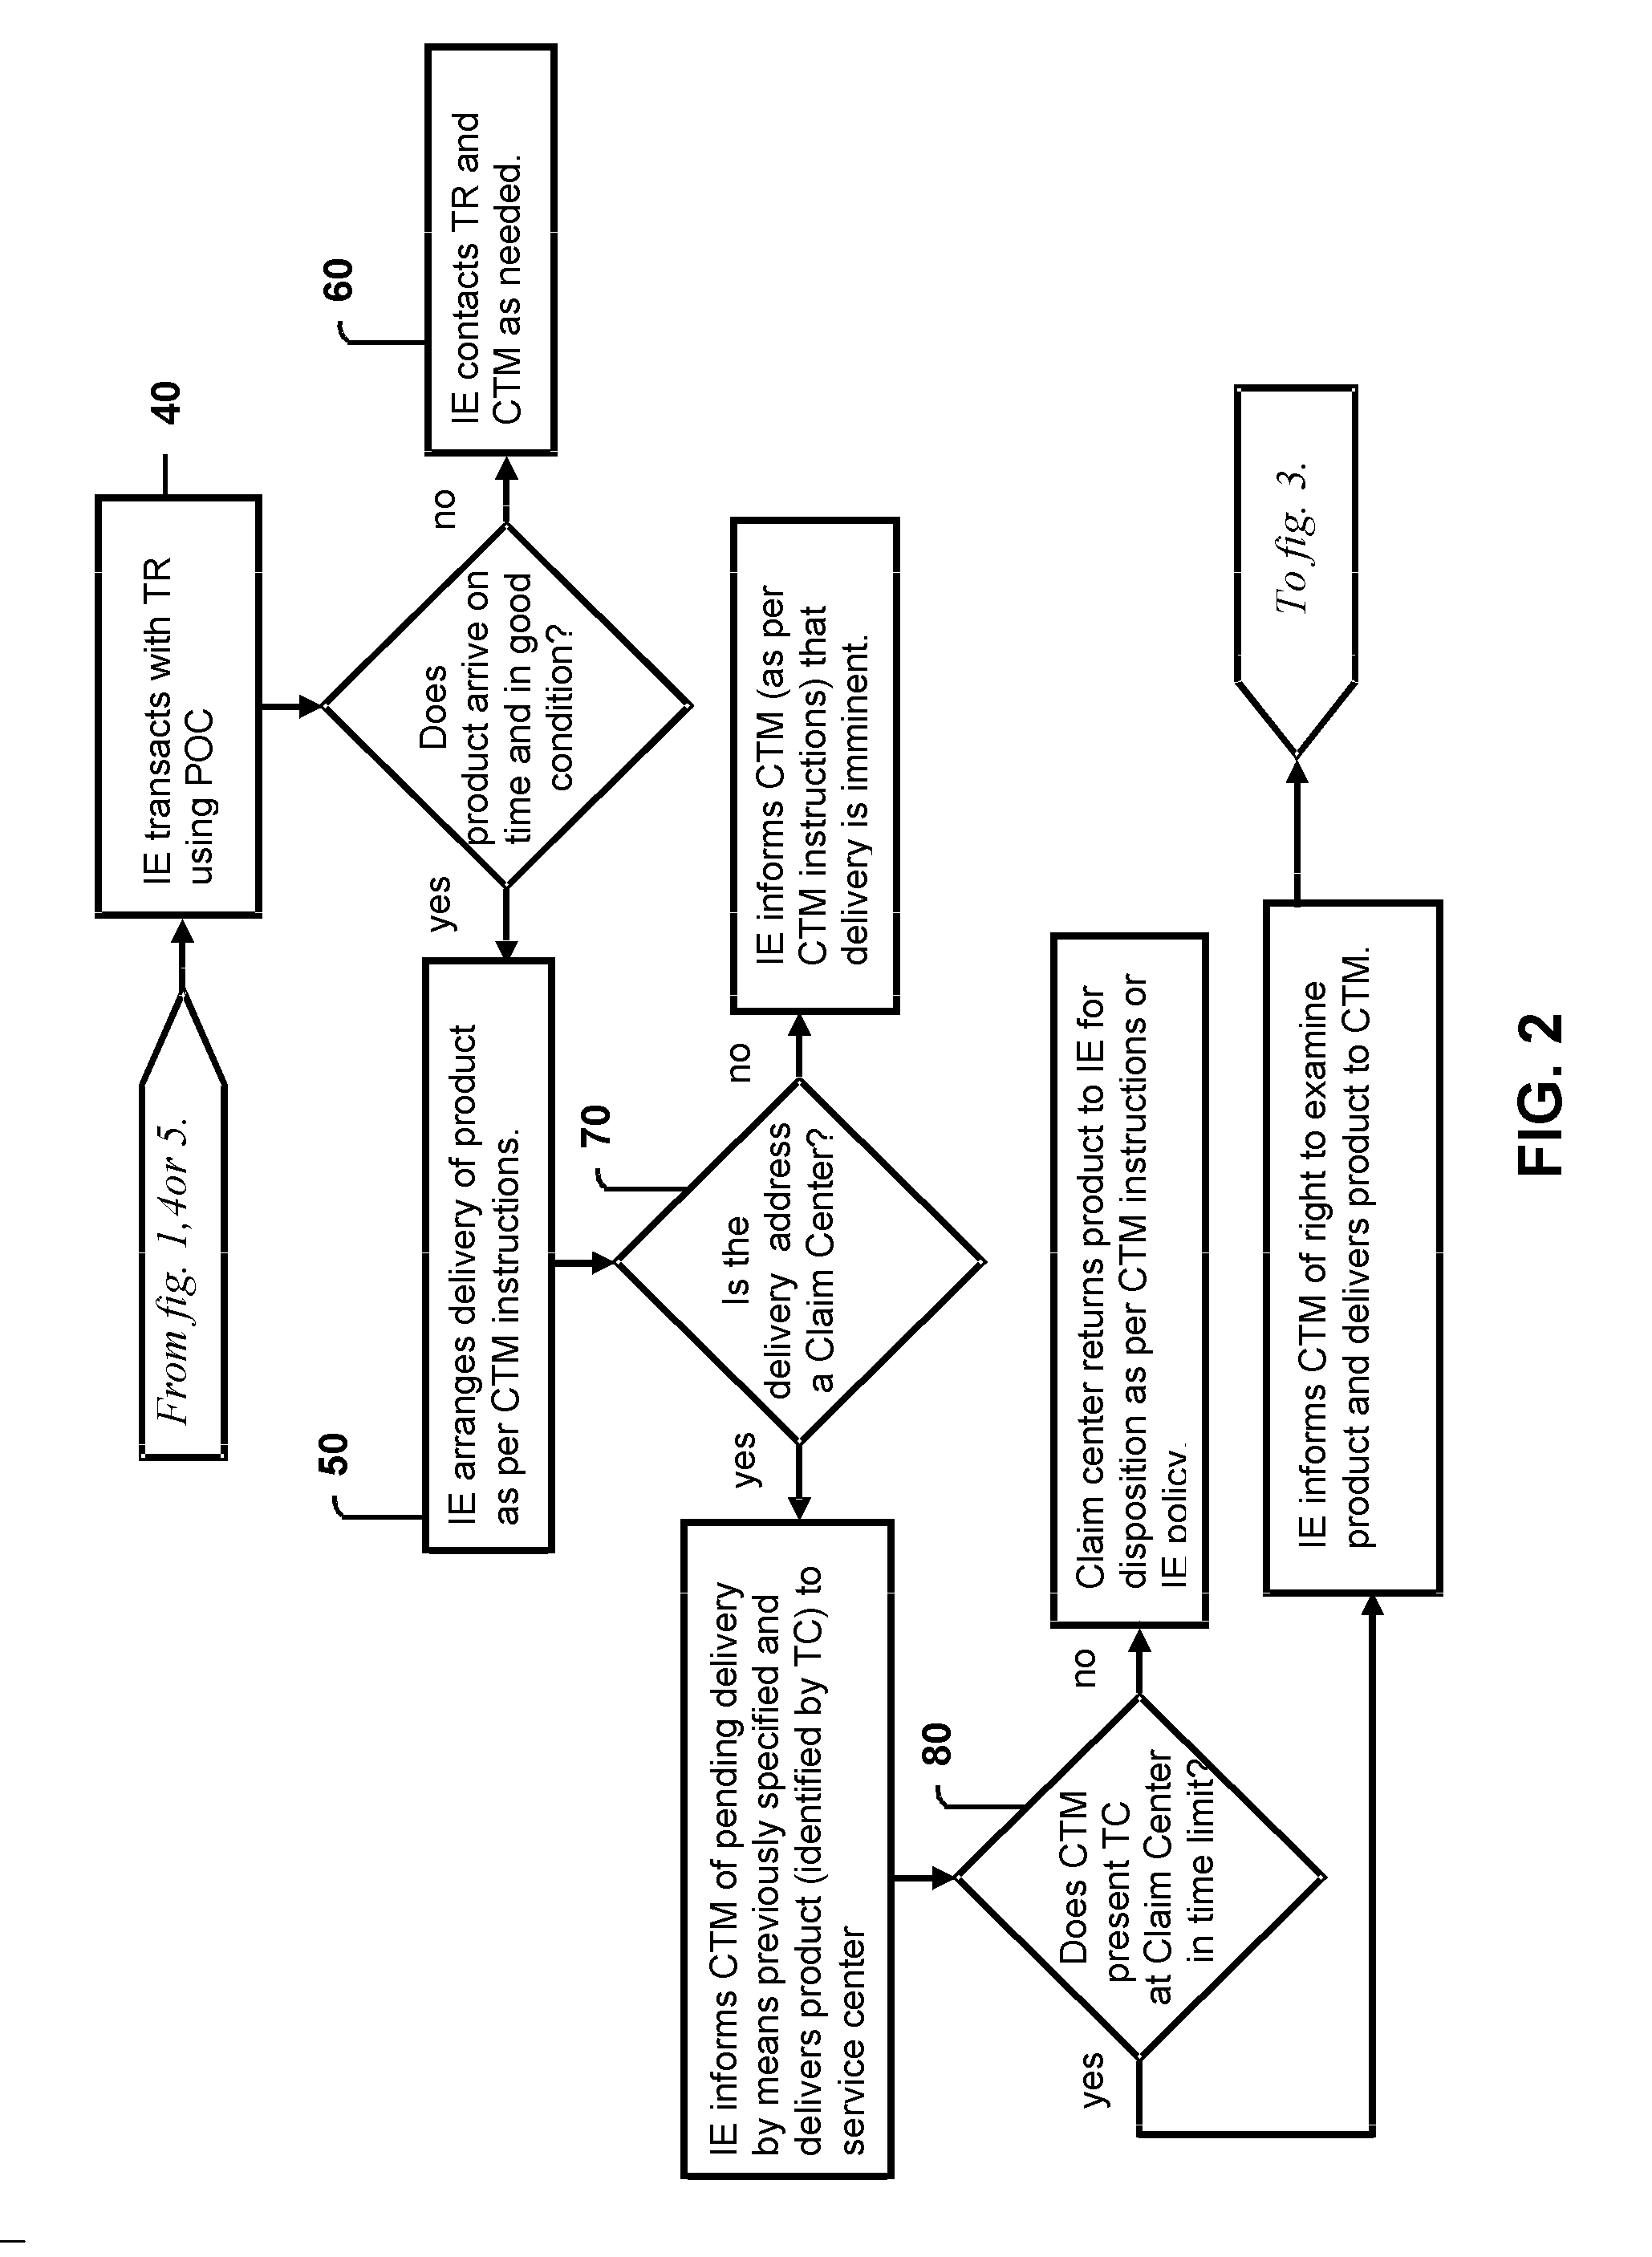 System and method for anonymous transactions and conveyances